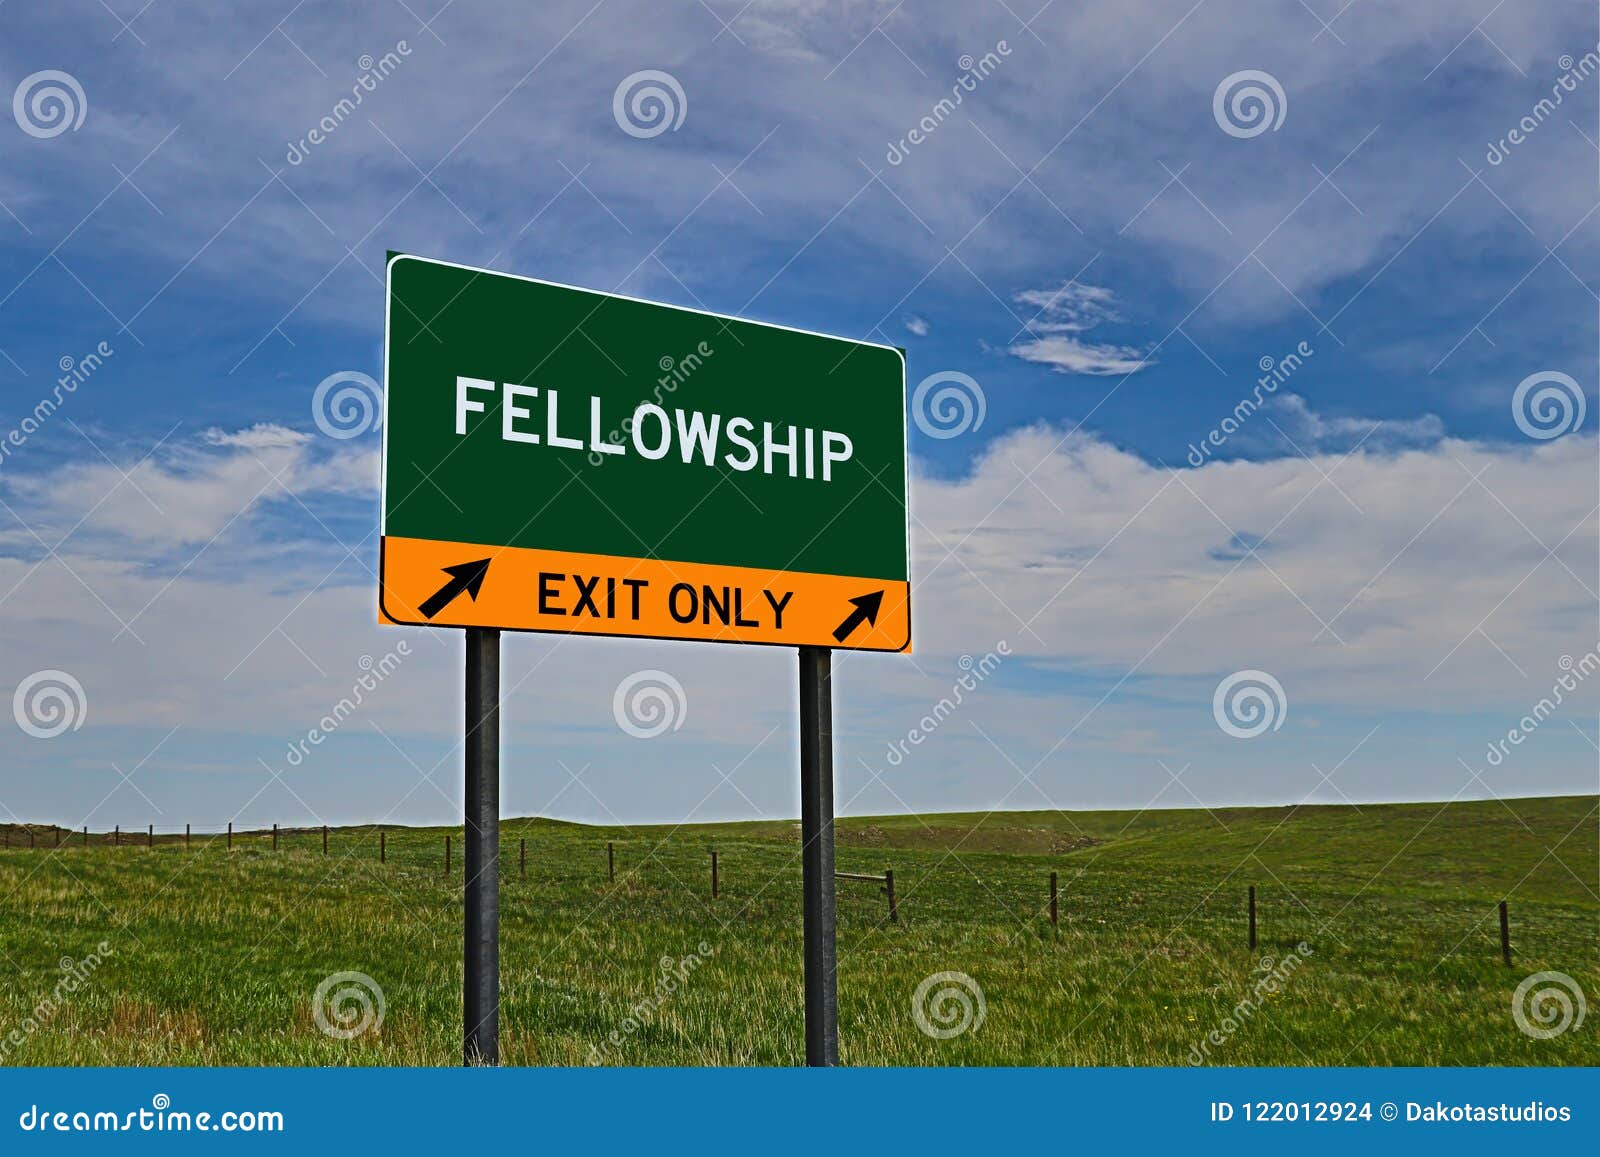 us highway exit sign for fellowship